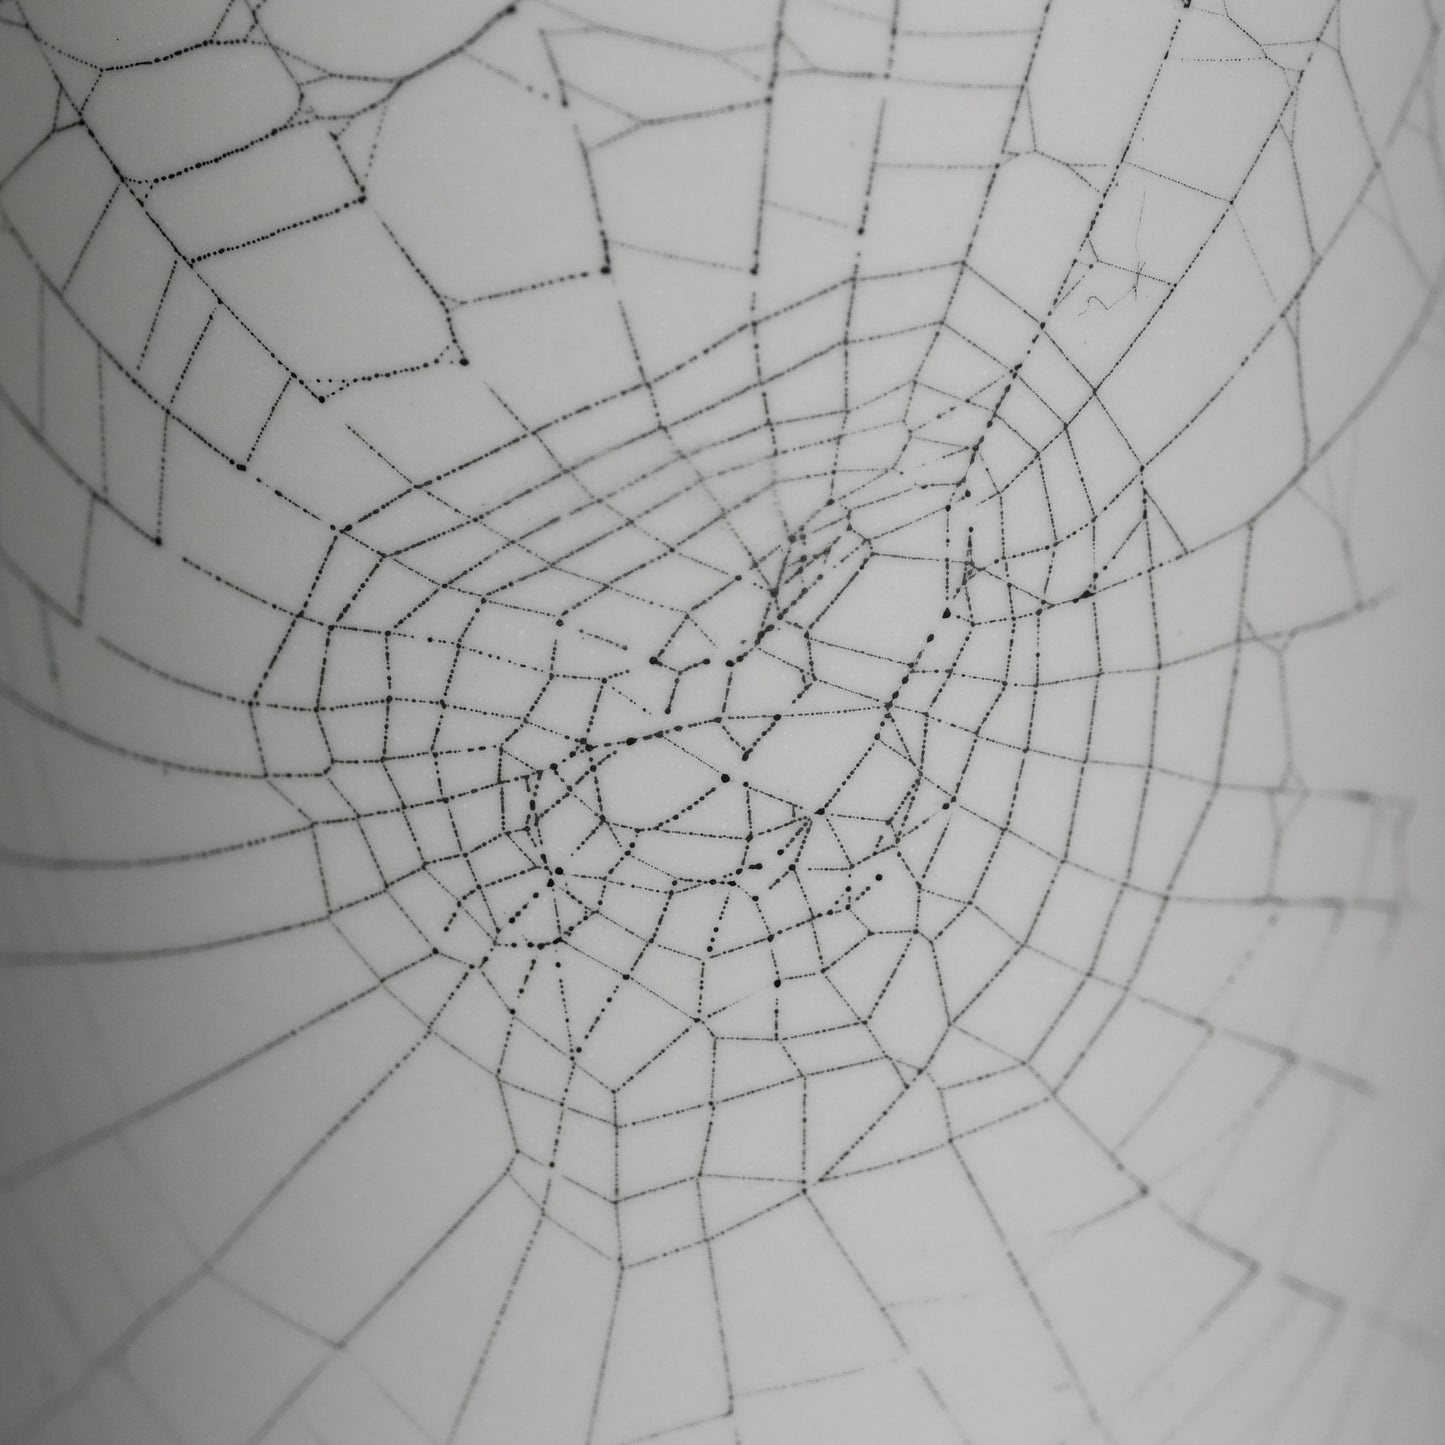 Web on Clay (187), Collected September 24, 2022